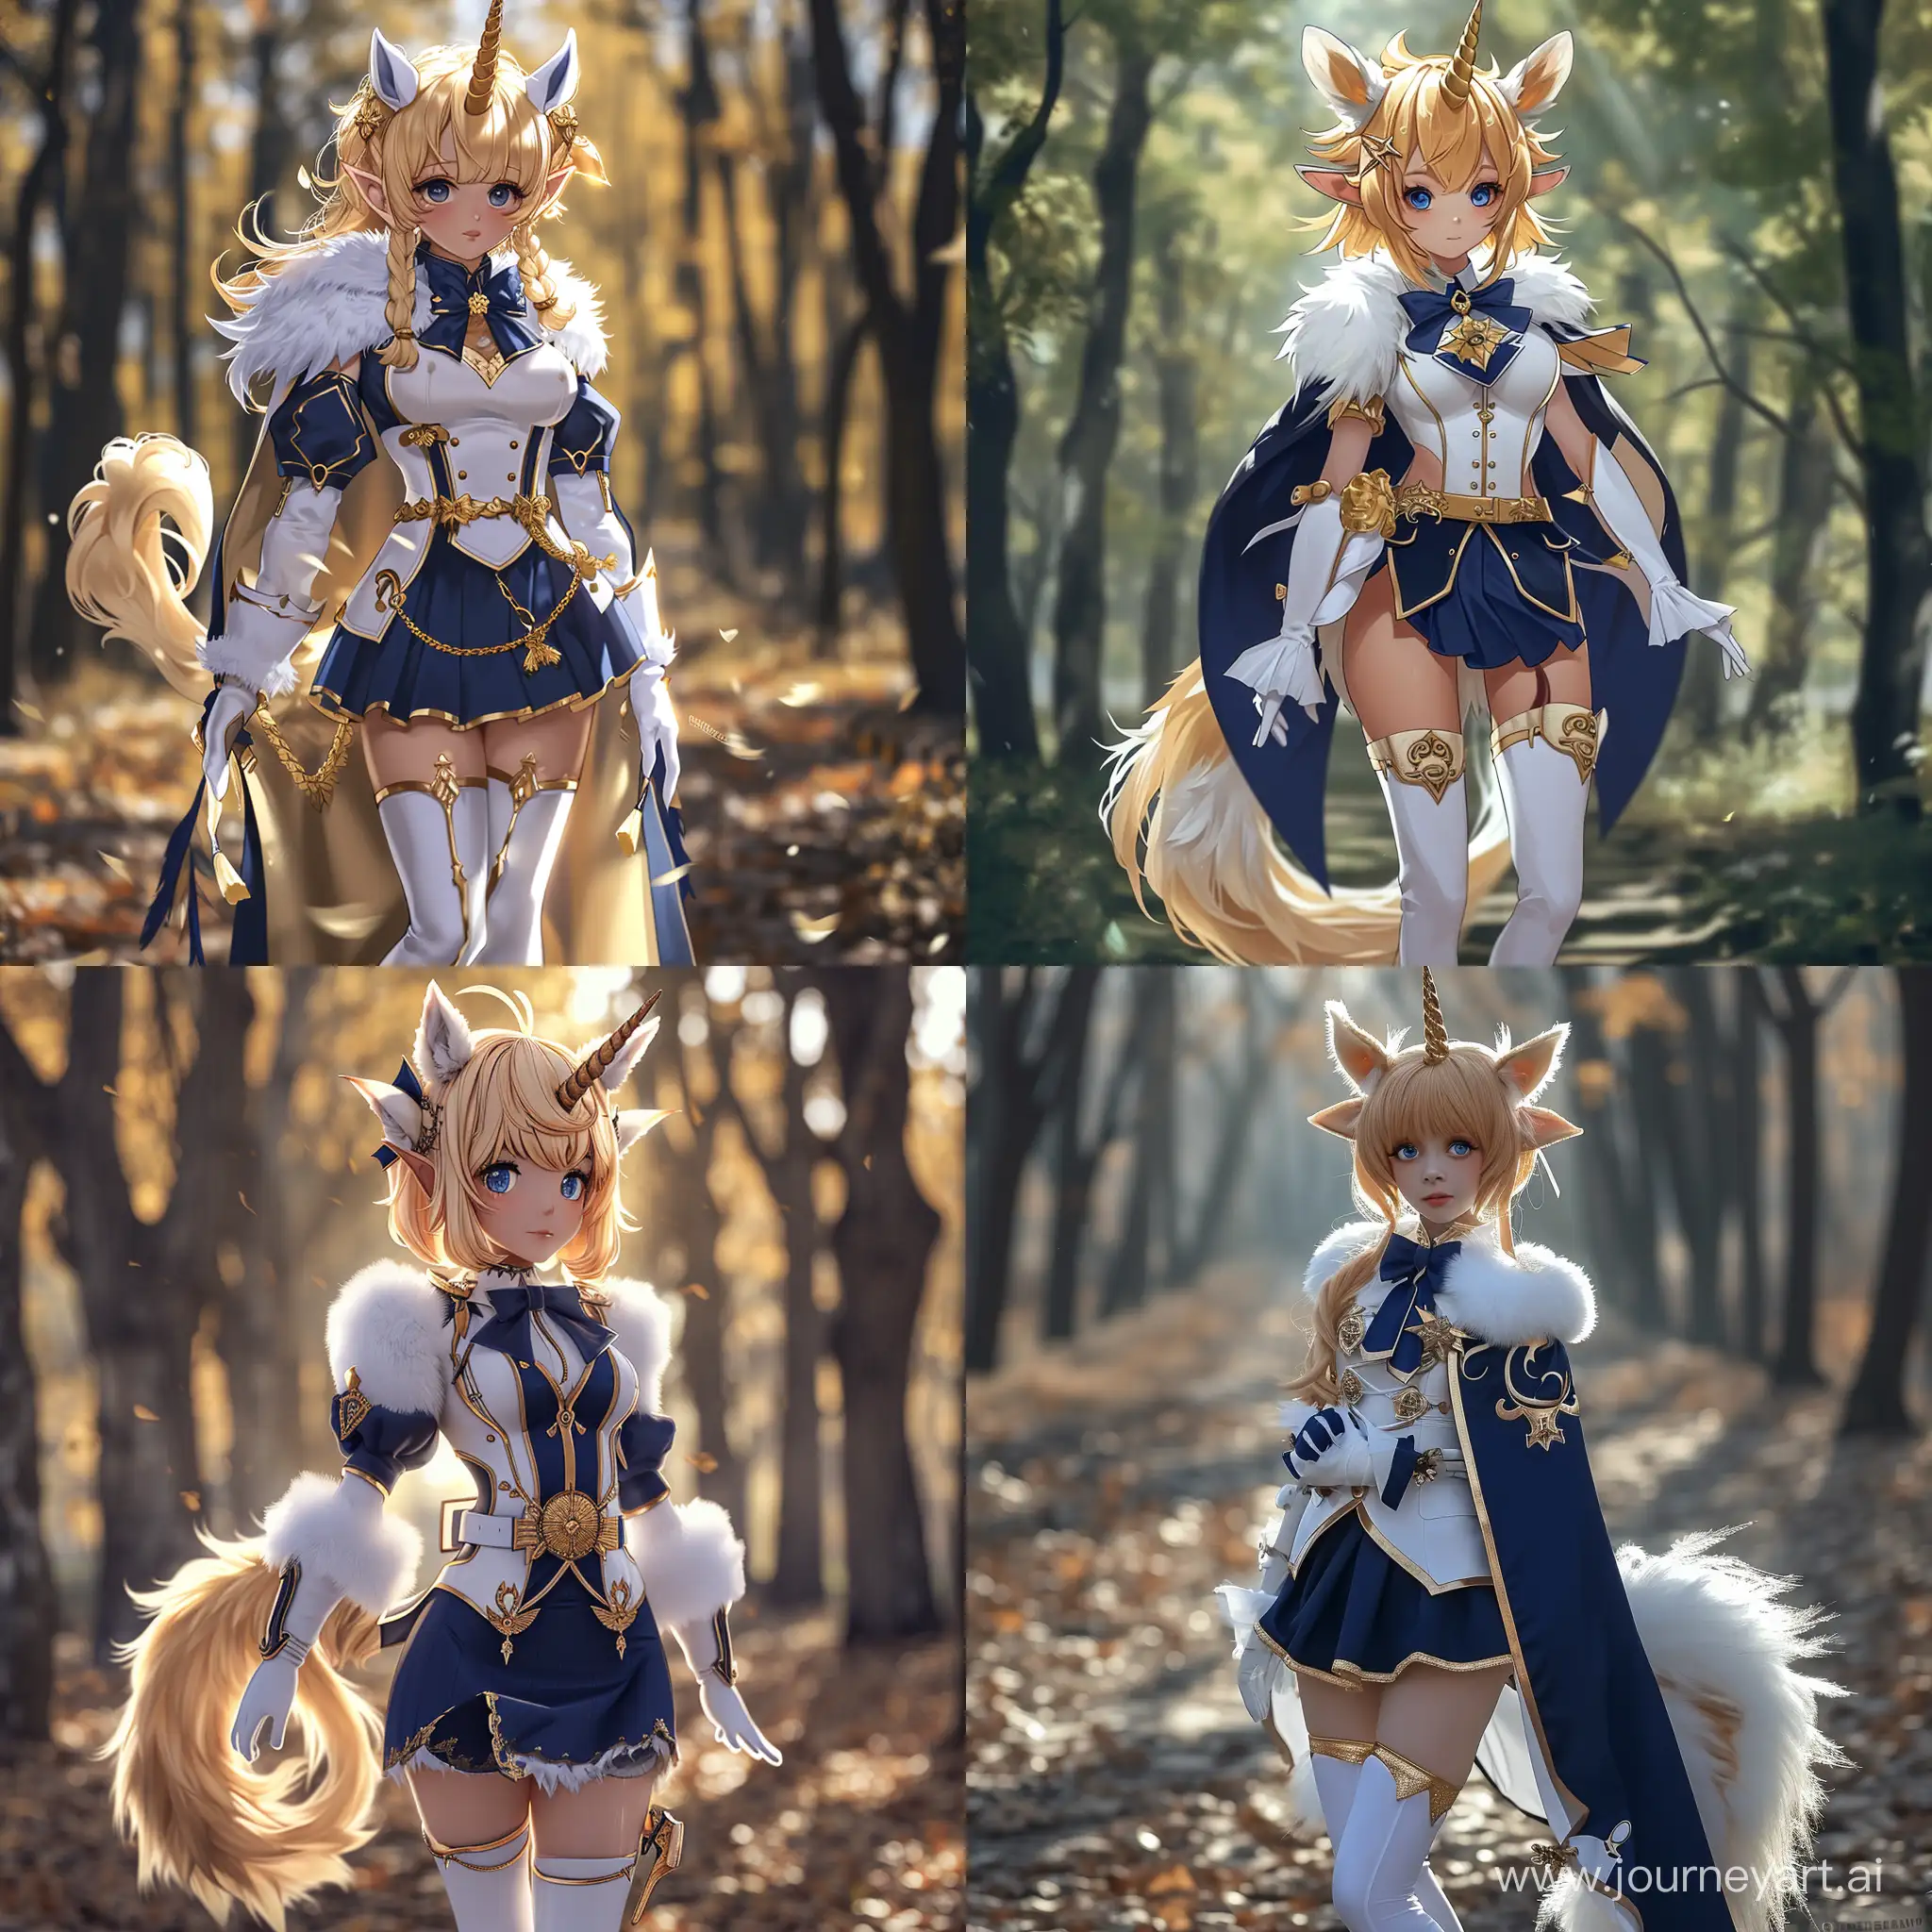 anime style, full-body image, beautiful young centaur woman, muscular, athletic, fair-skinned, golden blonde hair in a high ponytail, pure white horse fur, golden blonde horse tail, golden blonde feathering, golden unicorn horn, blue eyes, pointed elf ears, navy blue and white uniform with gold decorations, long white gloves, short navy blue cape, navy blue bow in her hair, navy blue bow in her tail, navy blue skirt, standing alone in a forest during the day